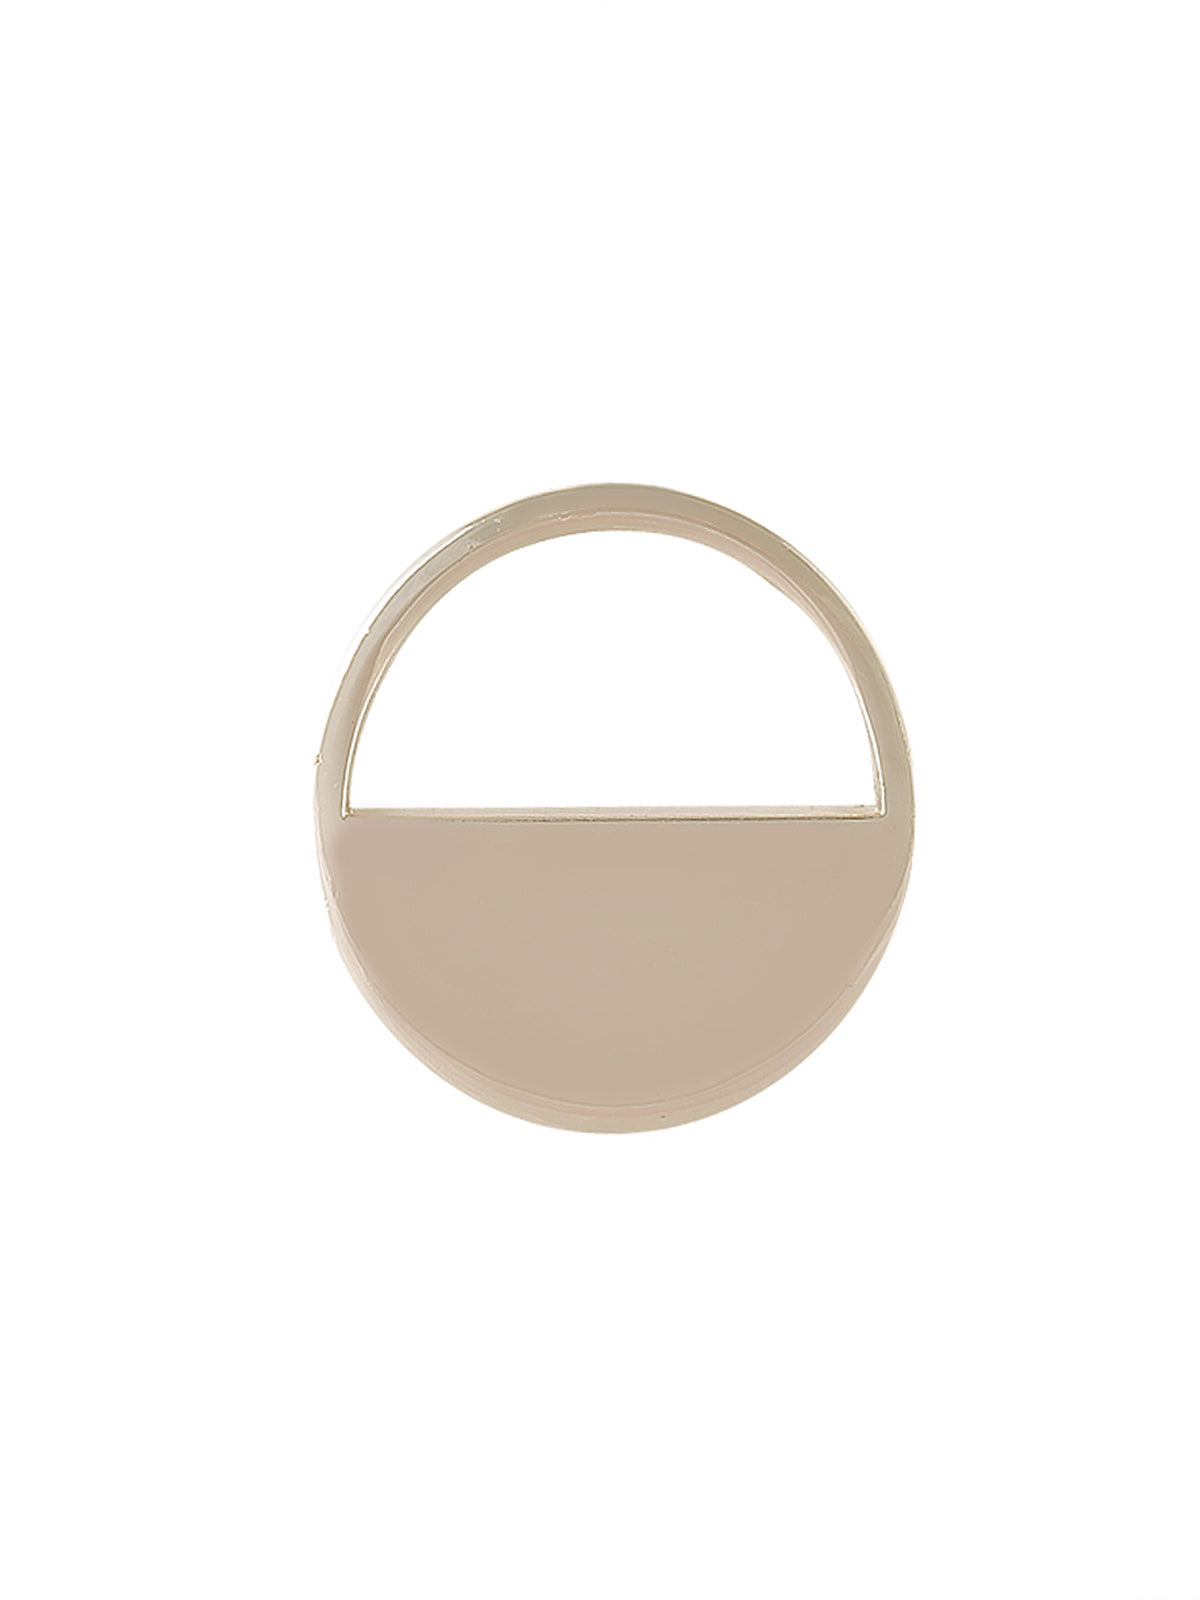 Fashionable Semi-Circle Ring Shape Decorative Button in Shiny Golden Color